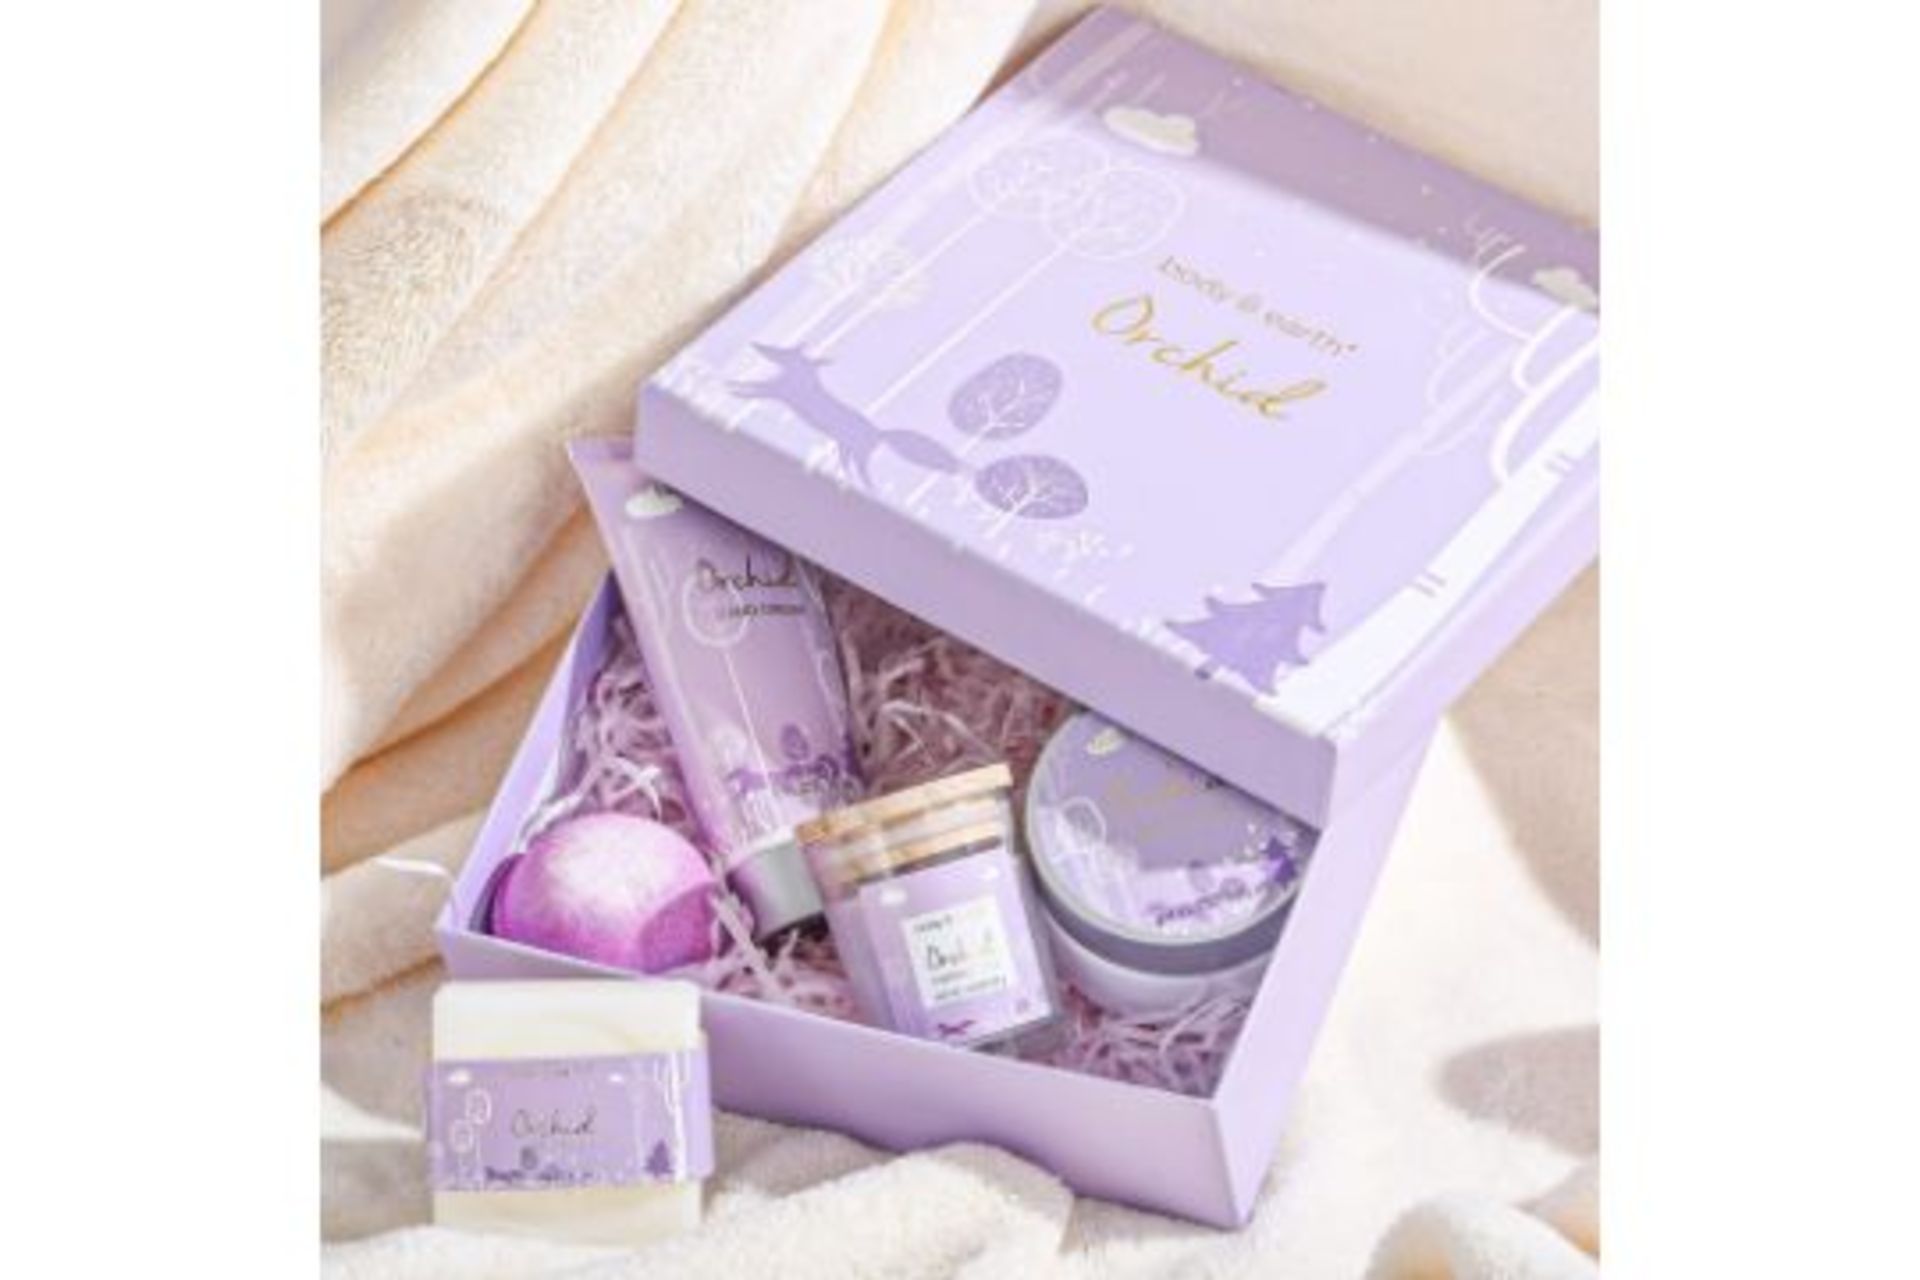 16 X New Packaged Body & Earth Orchid Bath Gift Set. (BE-BP-043) Orchid Scent: Infused with a - Image 2 of 2